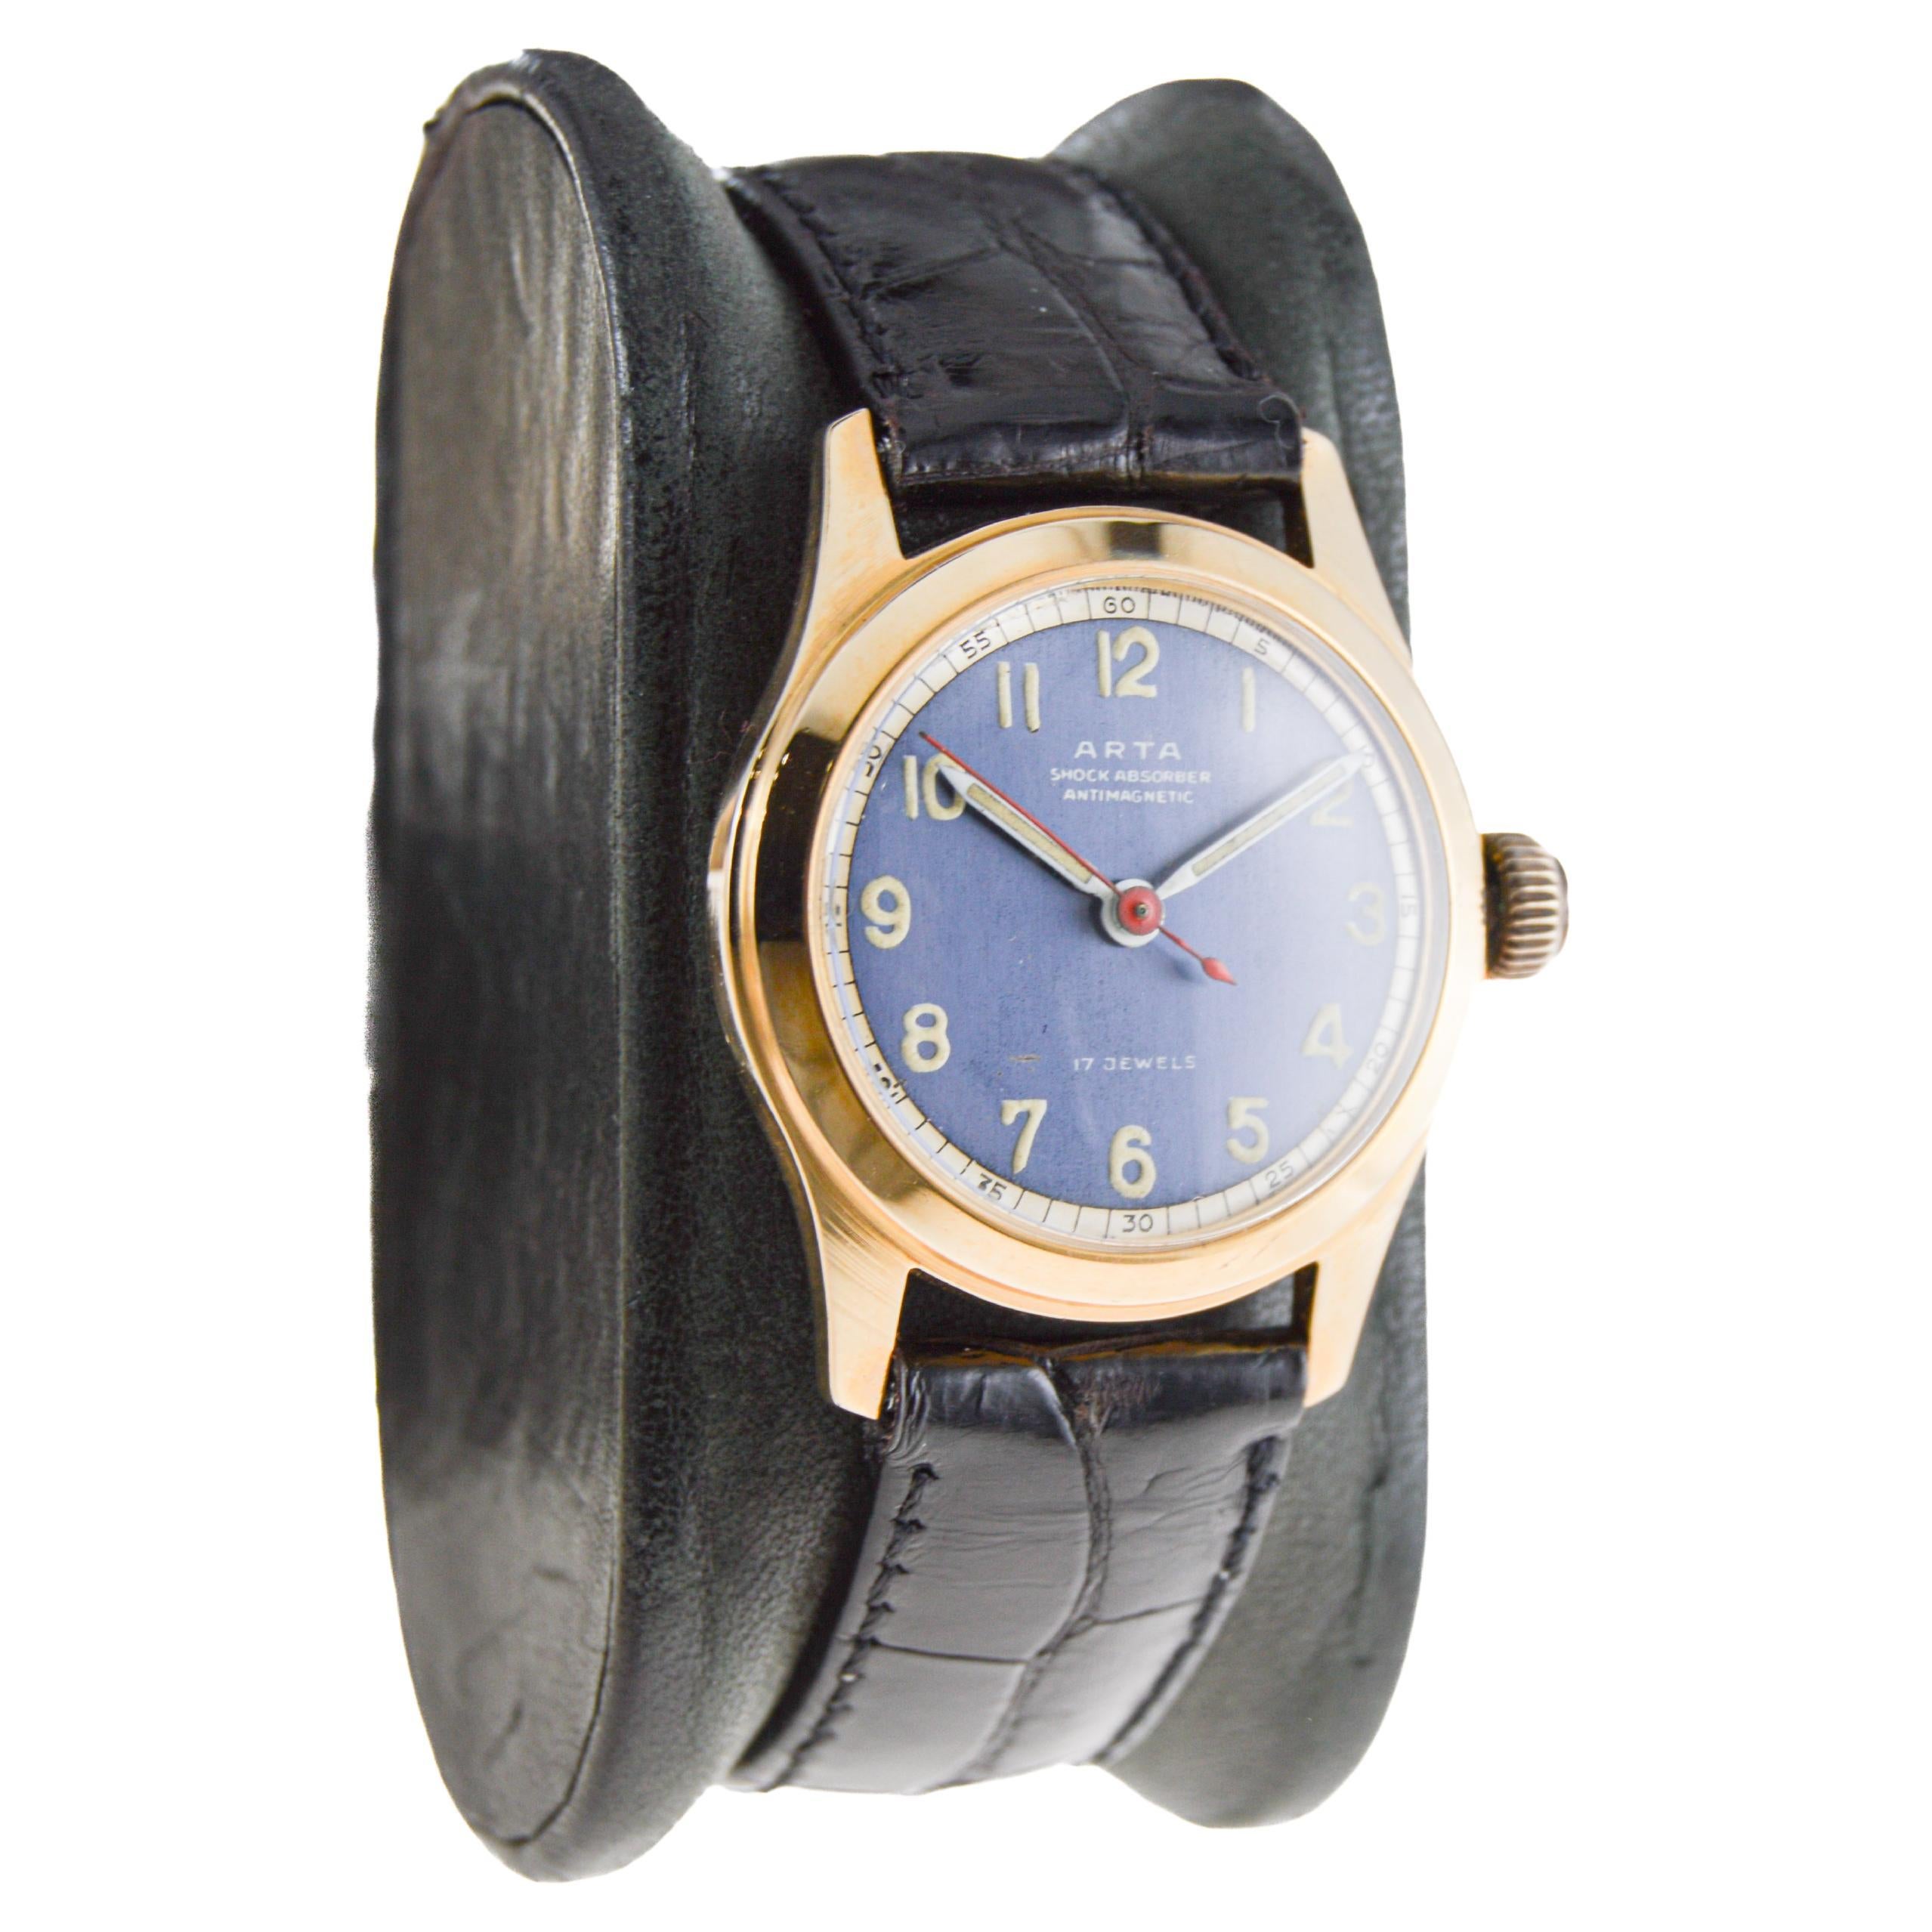 FACTORY / HOUSE: Arta Watch Company
STYLE / REFERENCE: Art Deco / Round
METAL / MATERIAL: 14kt. Yellow Gold
CIRCA: 1950's
DIMENSIONS: Length 35mm X Diameter 29mm
MOVEMENT / CALIBER: Manual Winding / 17 Jewels 
DIAL / HANDS: Original Blue Luminous